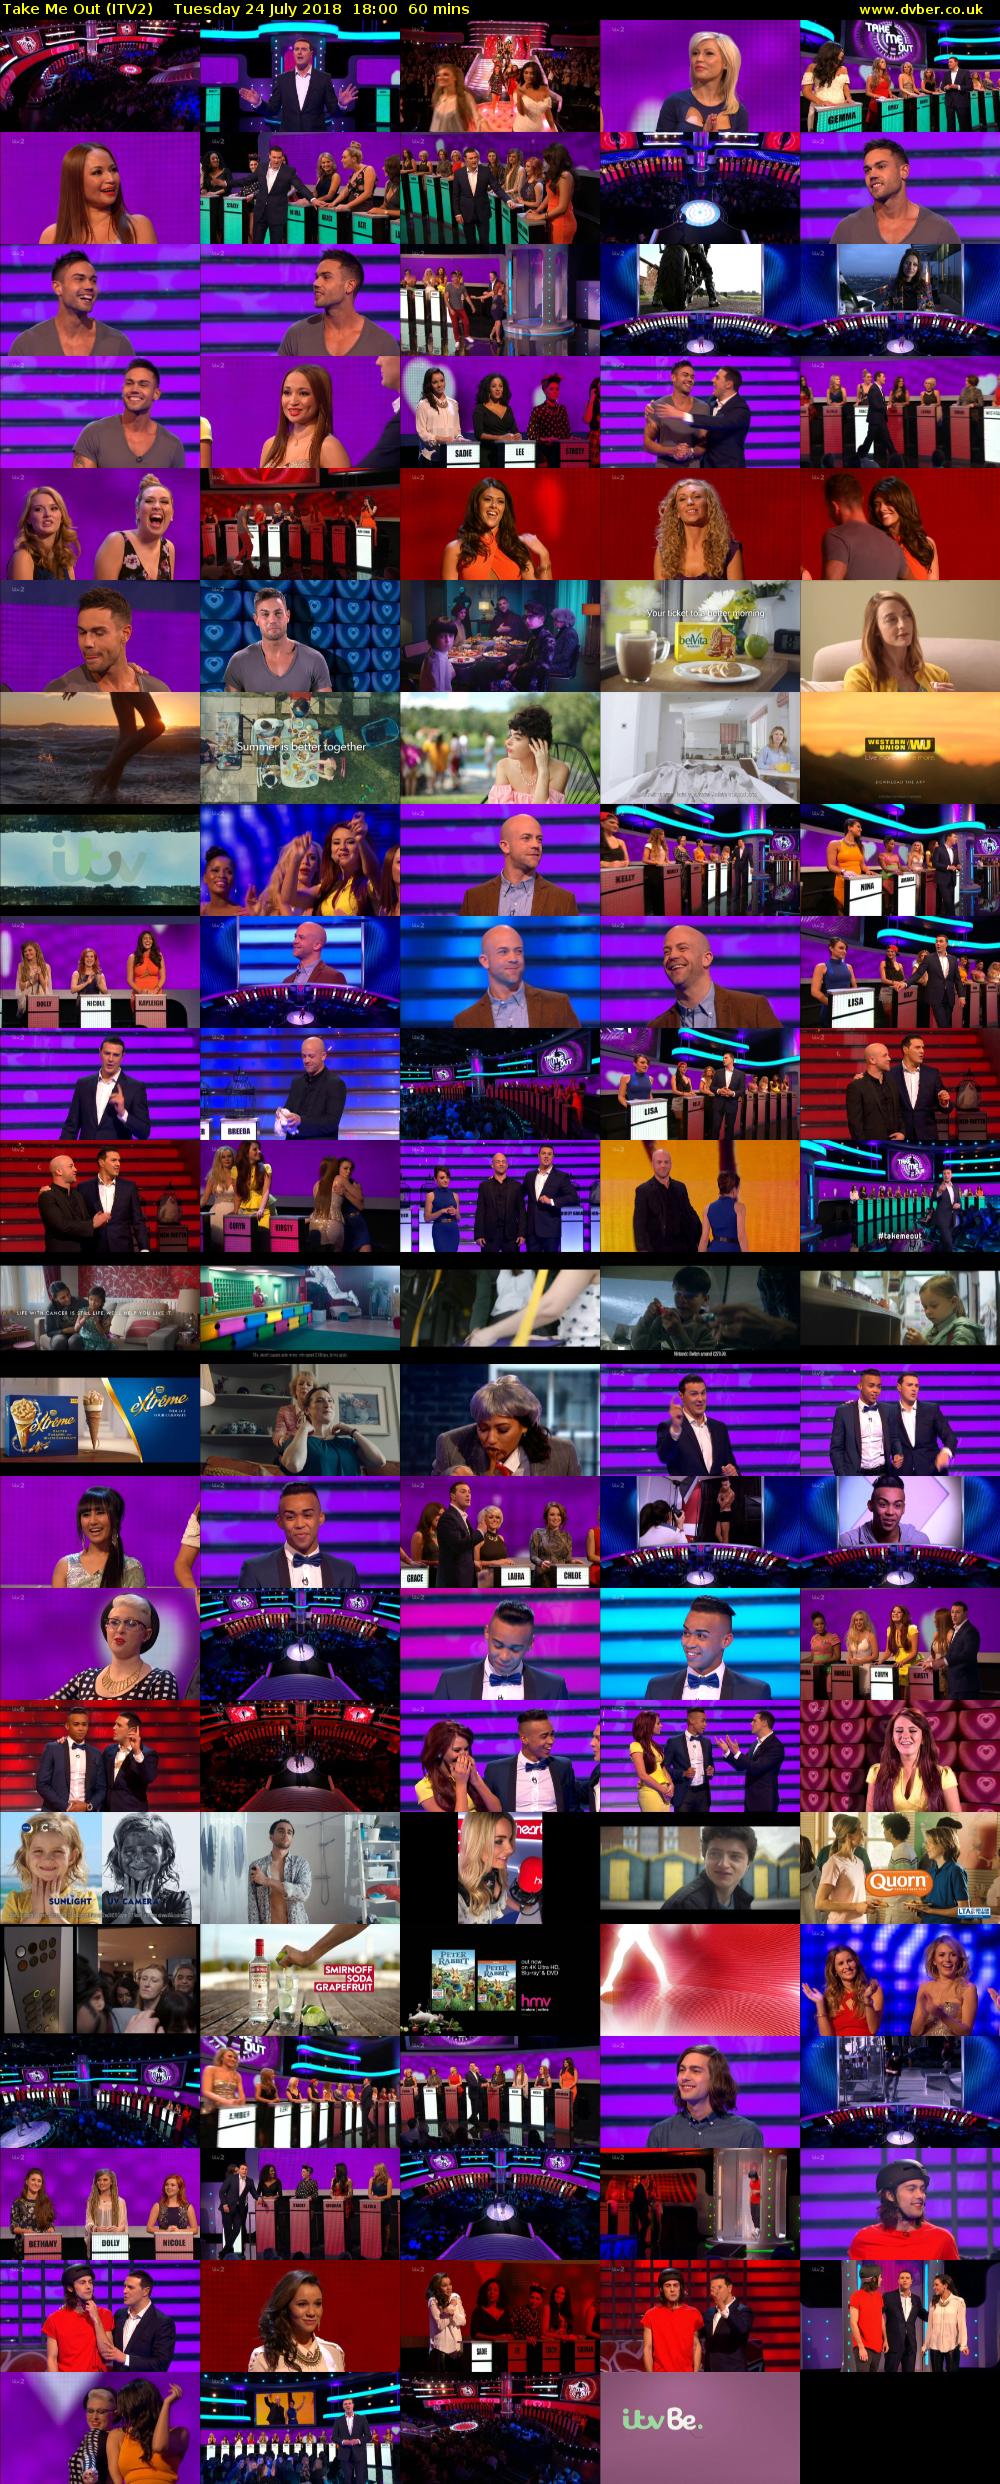 Take Me Out (ITV2) Tuesday 24 July 2018 18:00 - 19:00